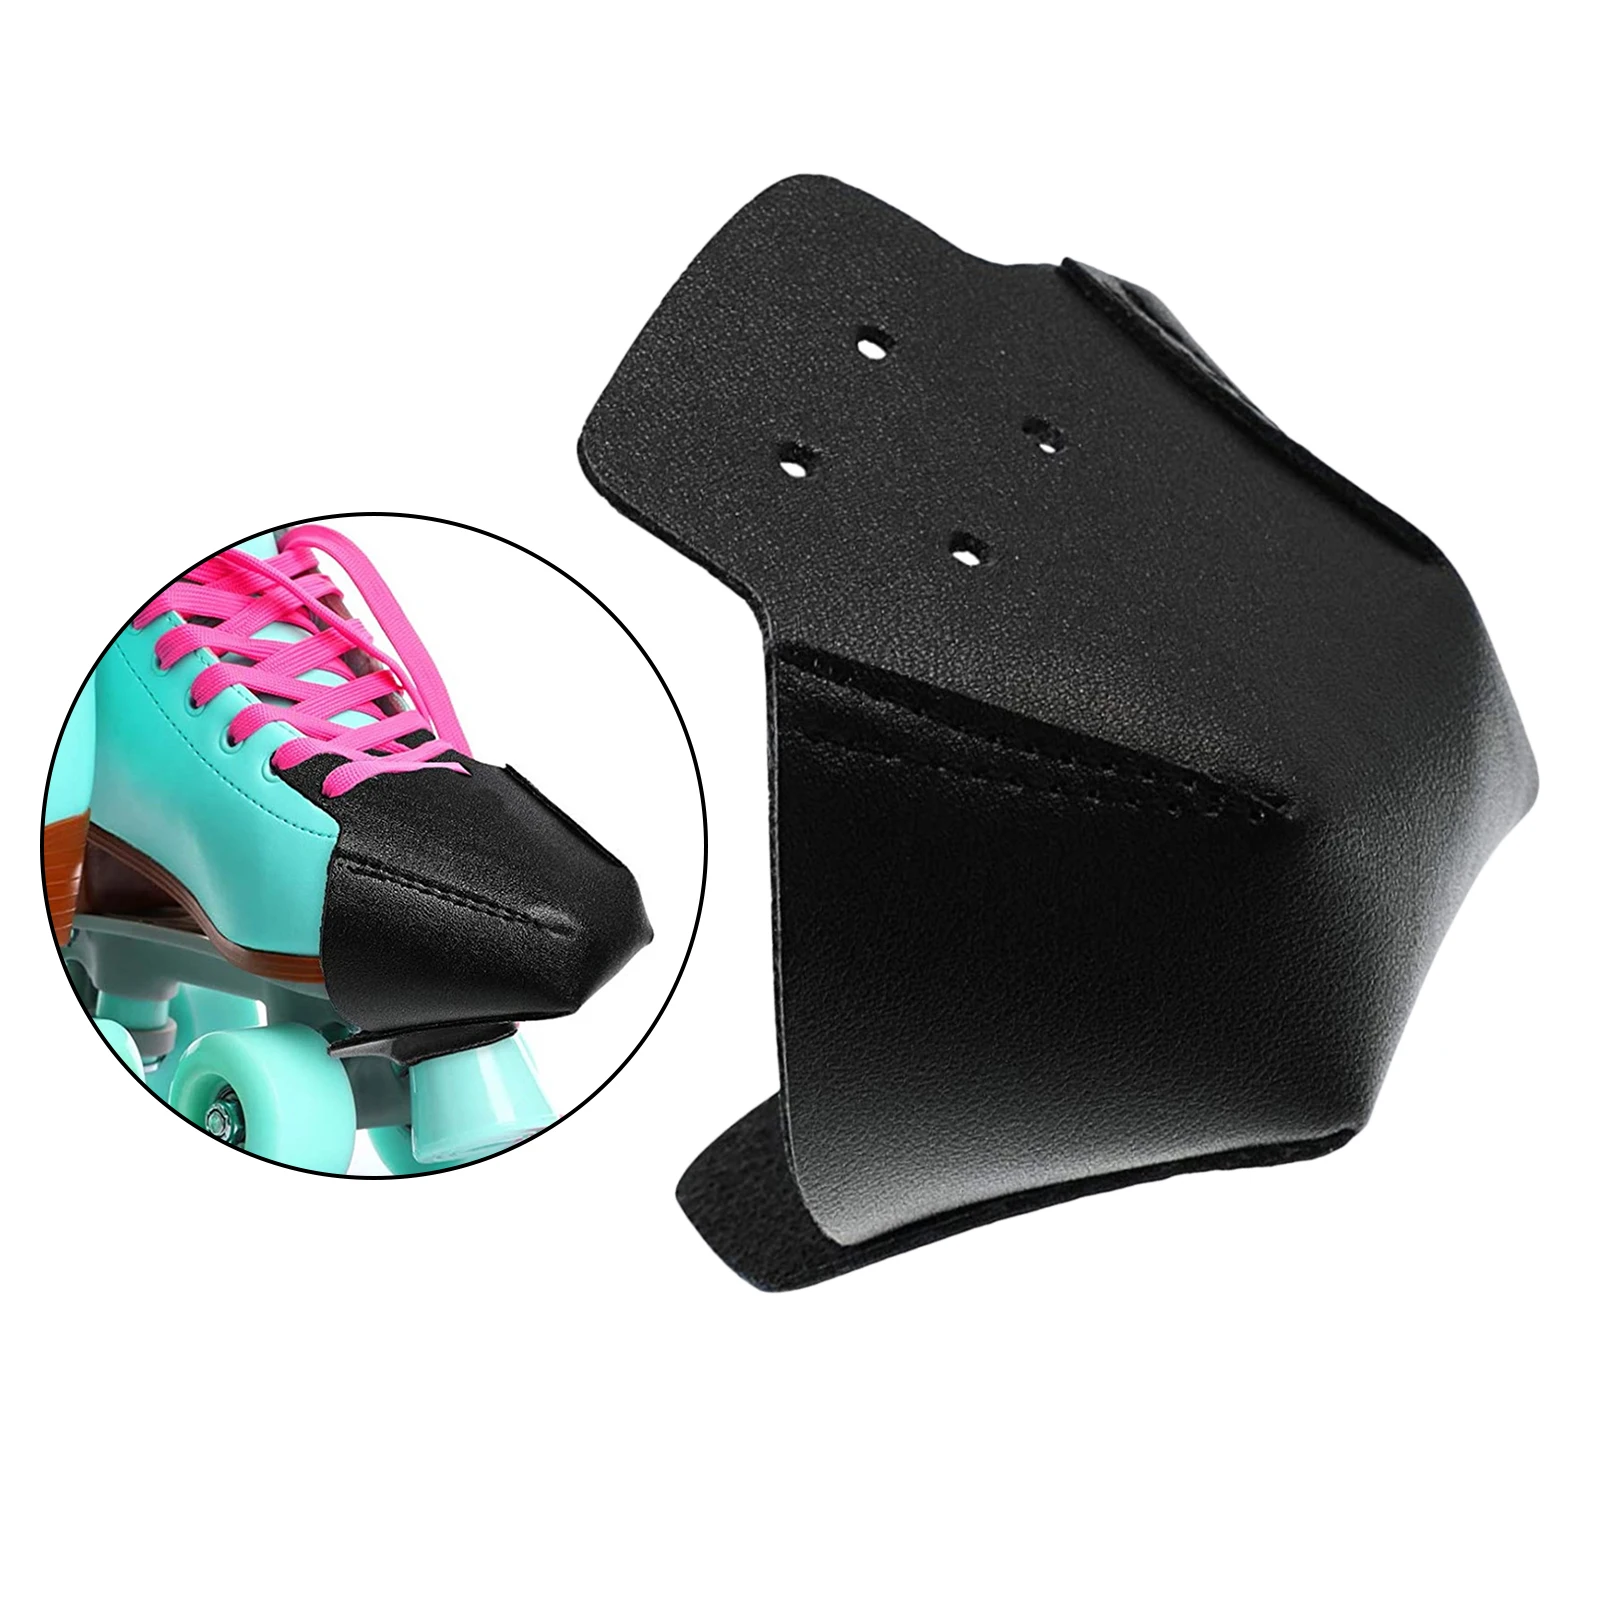 Universal Toe  Guards Protectors PU Leather Roller Skate  Protectors With 4 Hole Toe  Guard Protectors For Roller Skate